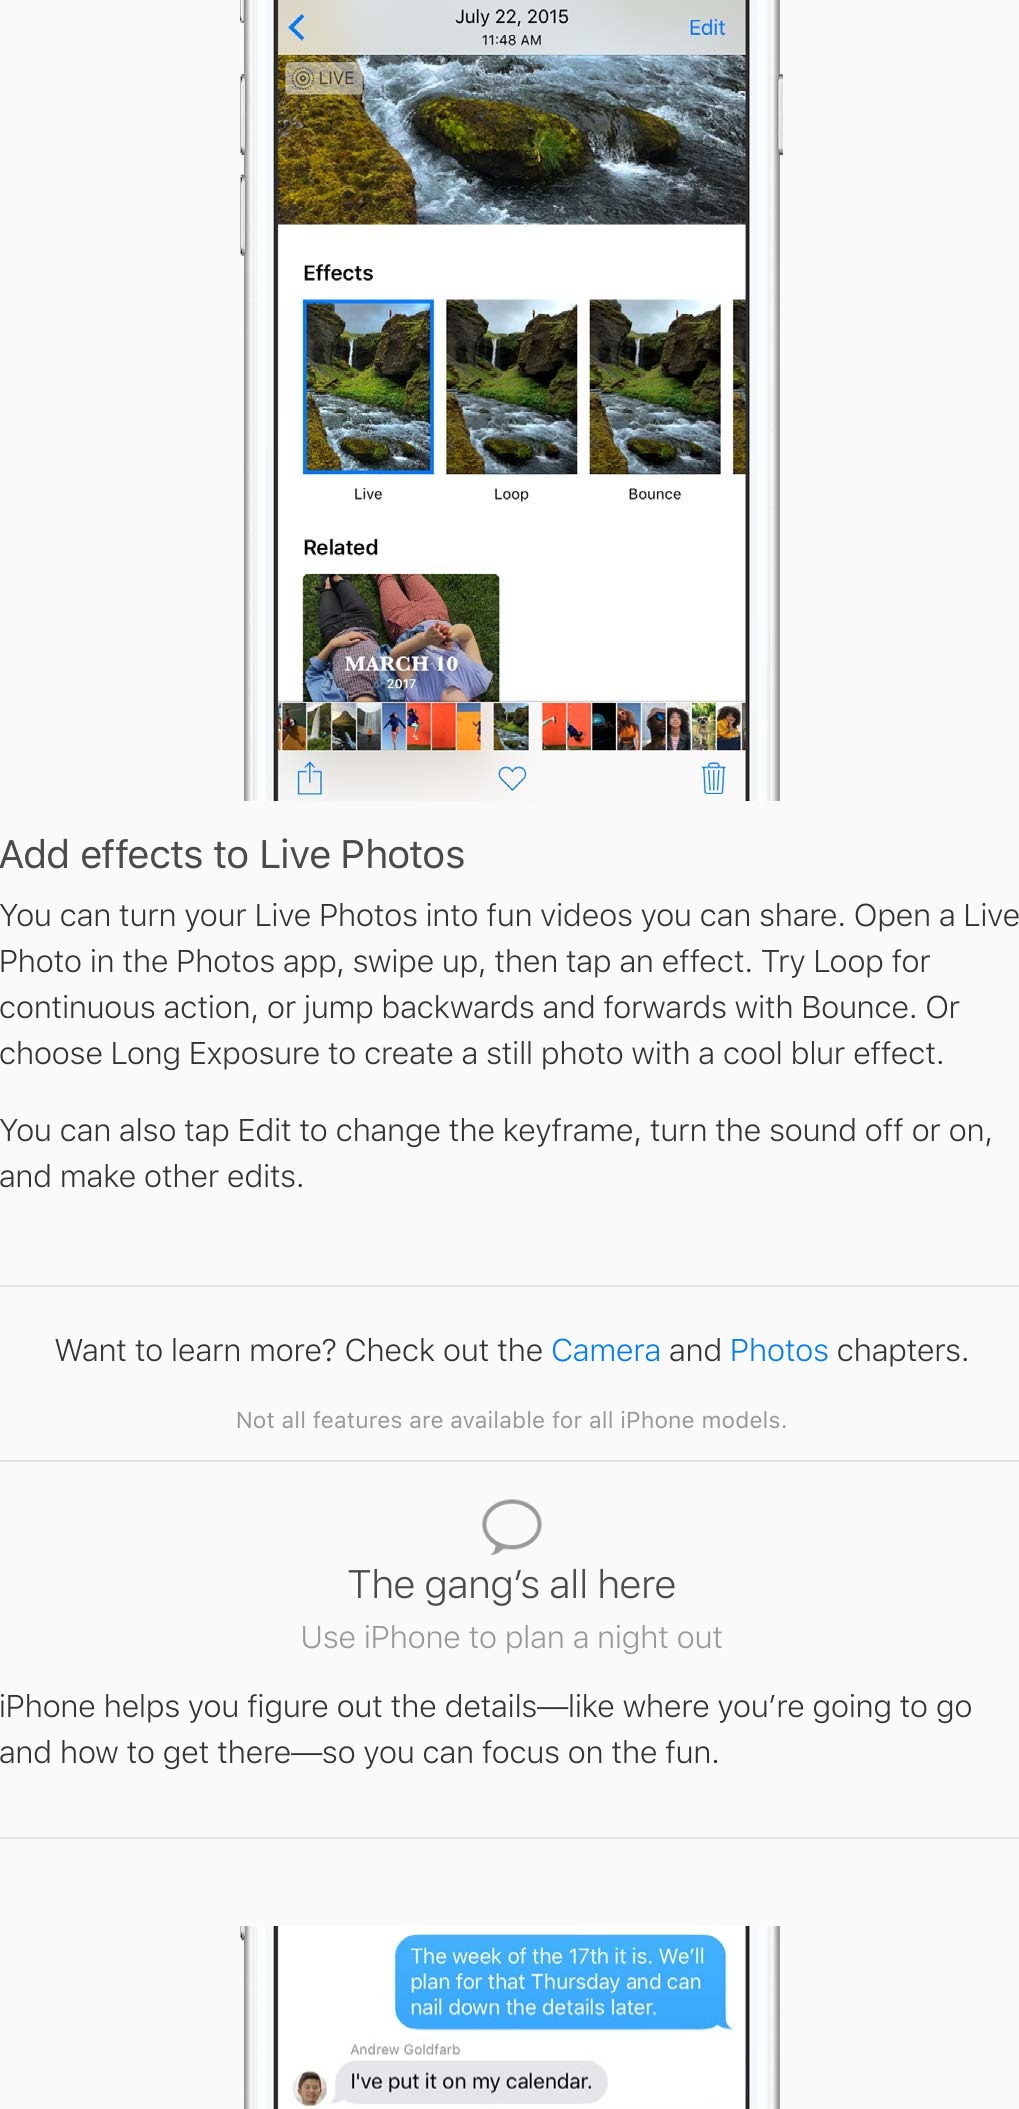 Add effects to Live PhotosYou can turn your Live Photos into fun videos you can share. Open a LivePhoto in the Photos app, swipe up, then tap an effect. Try Loop forcontinuous action, or jump backwards and forwards with Bounce. Orchoose Long Exposure to create a still photo with a cool blur effect.You can also tap Edit to change the keyframe, turn the sound off or on,and make other edits.Want to learn more? Check out the   and   chapters.Not all features are available for all iPhone models.Camera PhotosThe gangʼs all hereUse iPhone to plan a night outiPhone helps you figure out the details—like where youʼre going to goand how to get there—so you can focus on the fun.